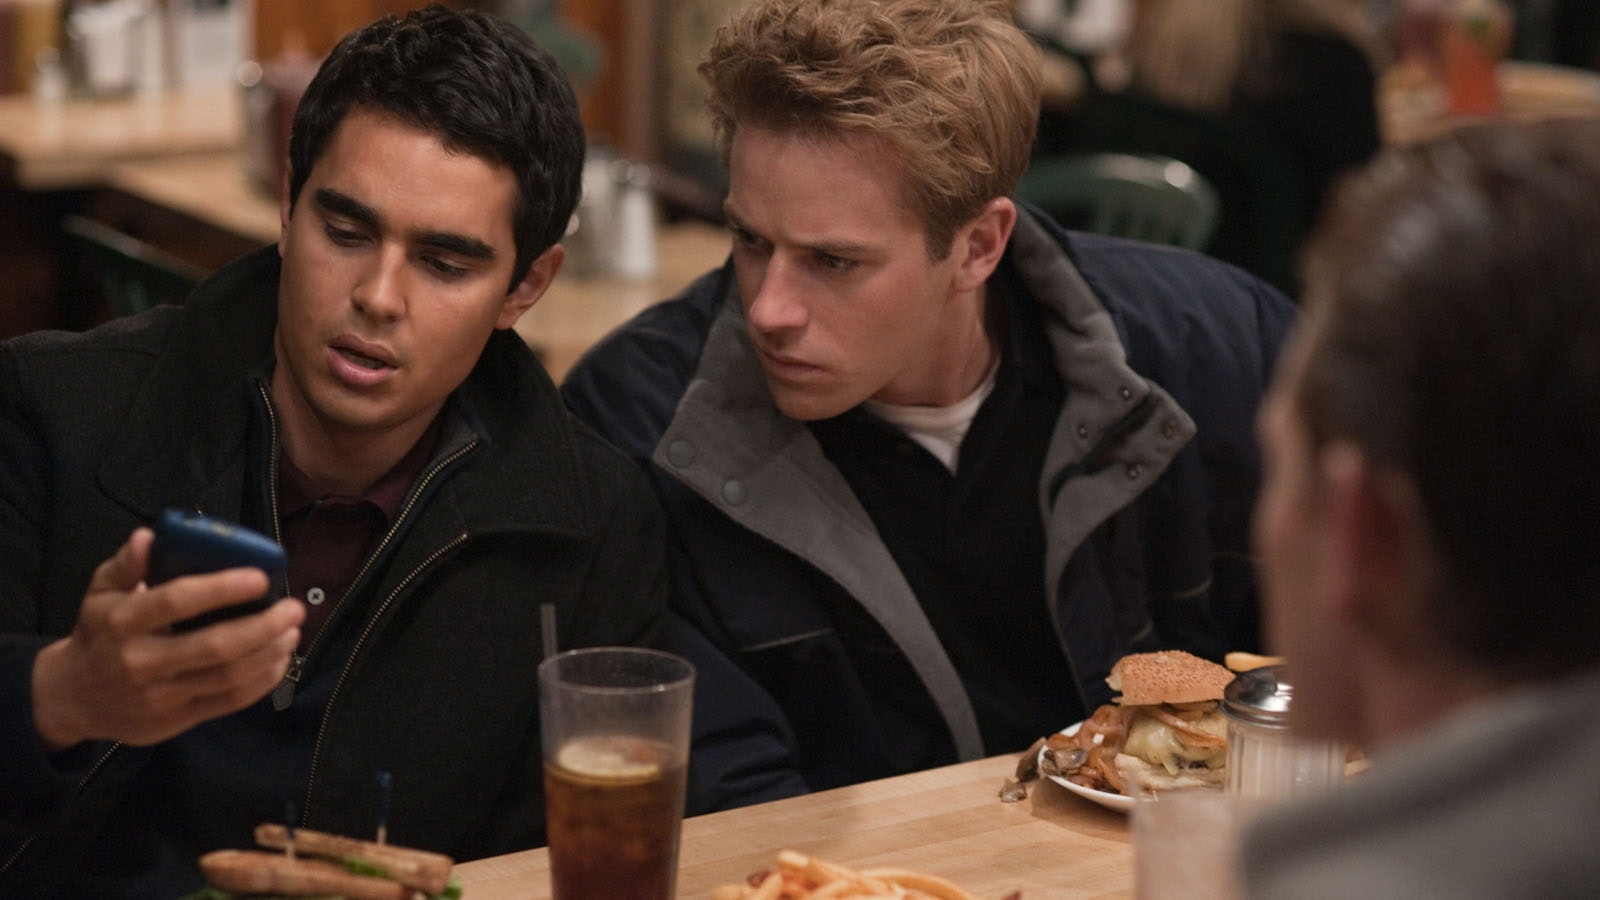 Max Minghella, left, and Armie Hammer in Columbia Pictures' "The Social Network," starring Jesse Eisenberg.